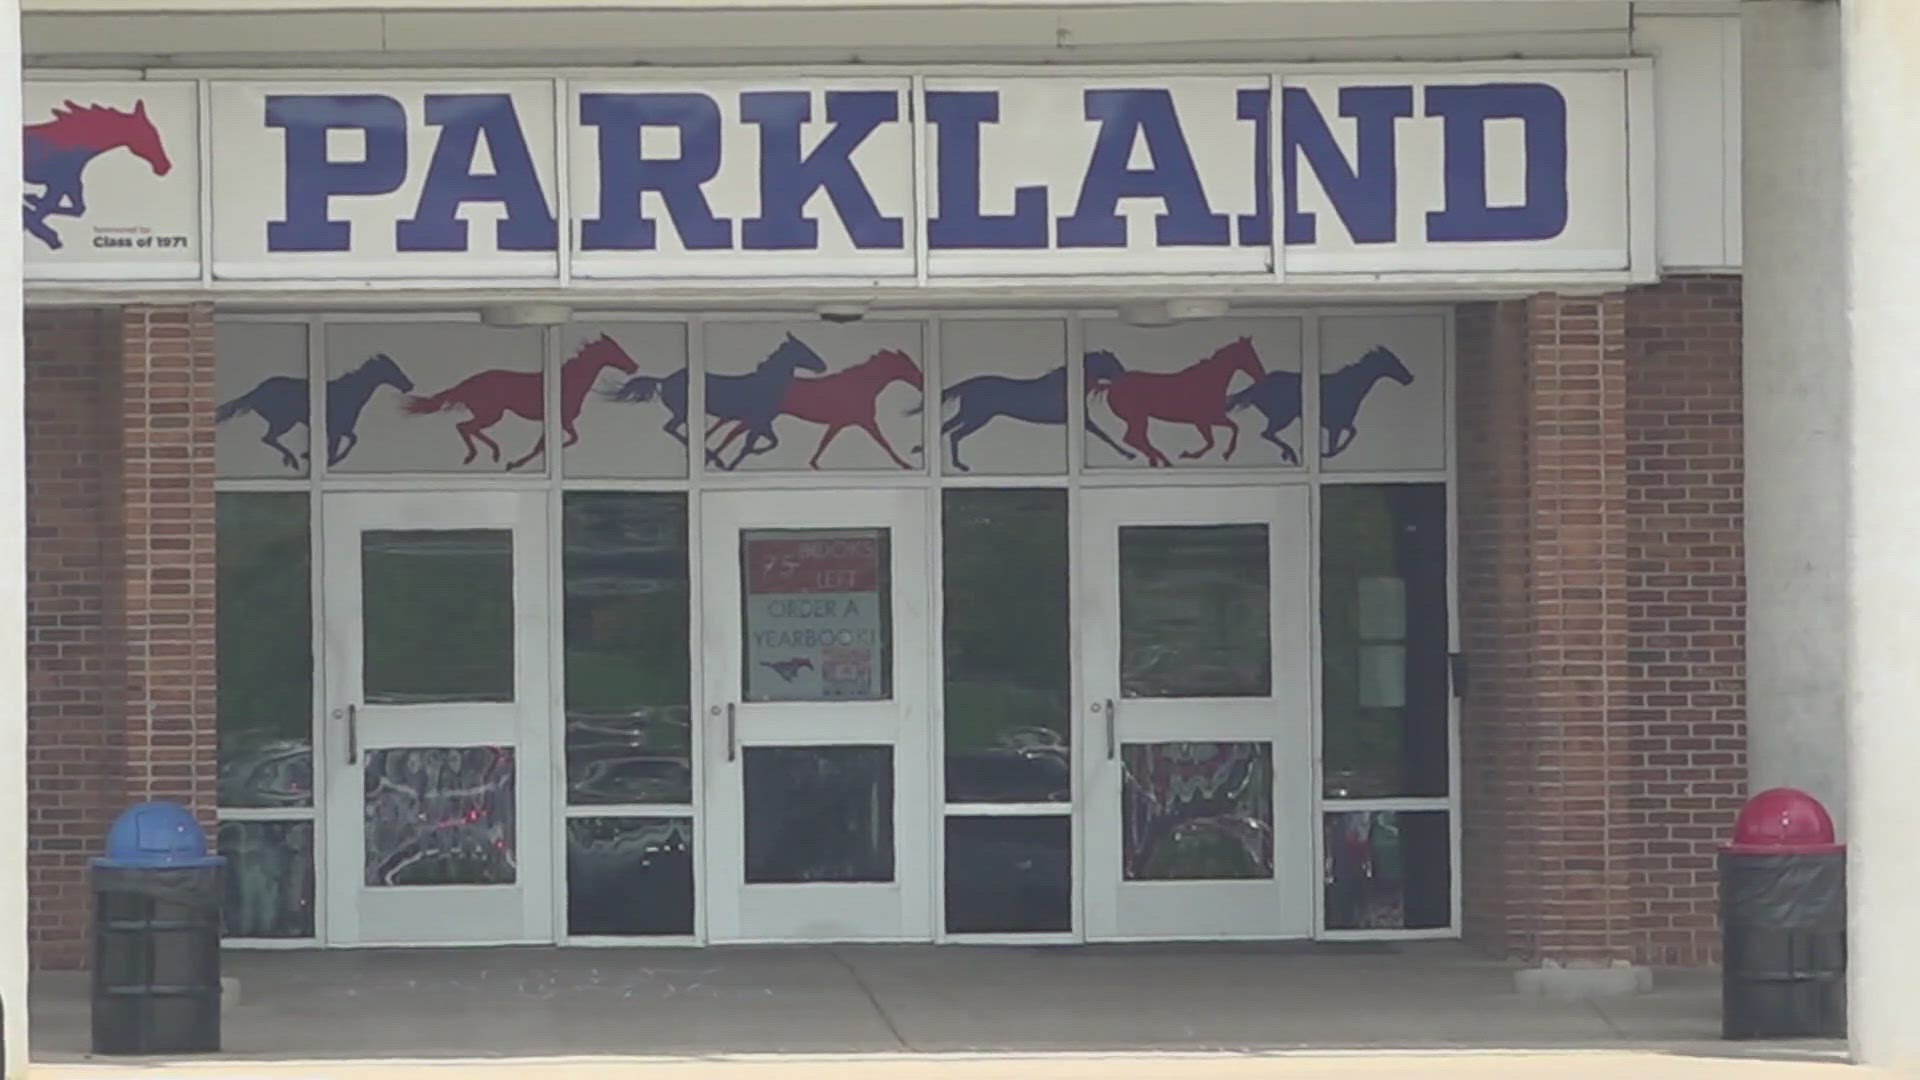 Extra law enforcement at Parkland High School Wedneday after a gun went off and hit a female student in the leg Tuesday. Officials said metal detectors weren't used.